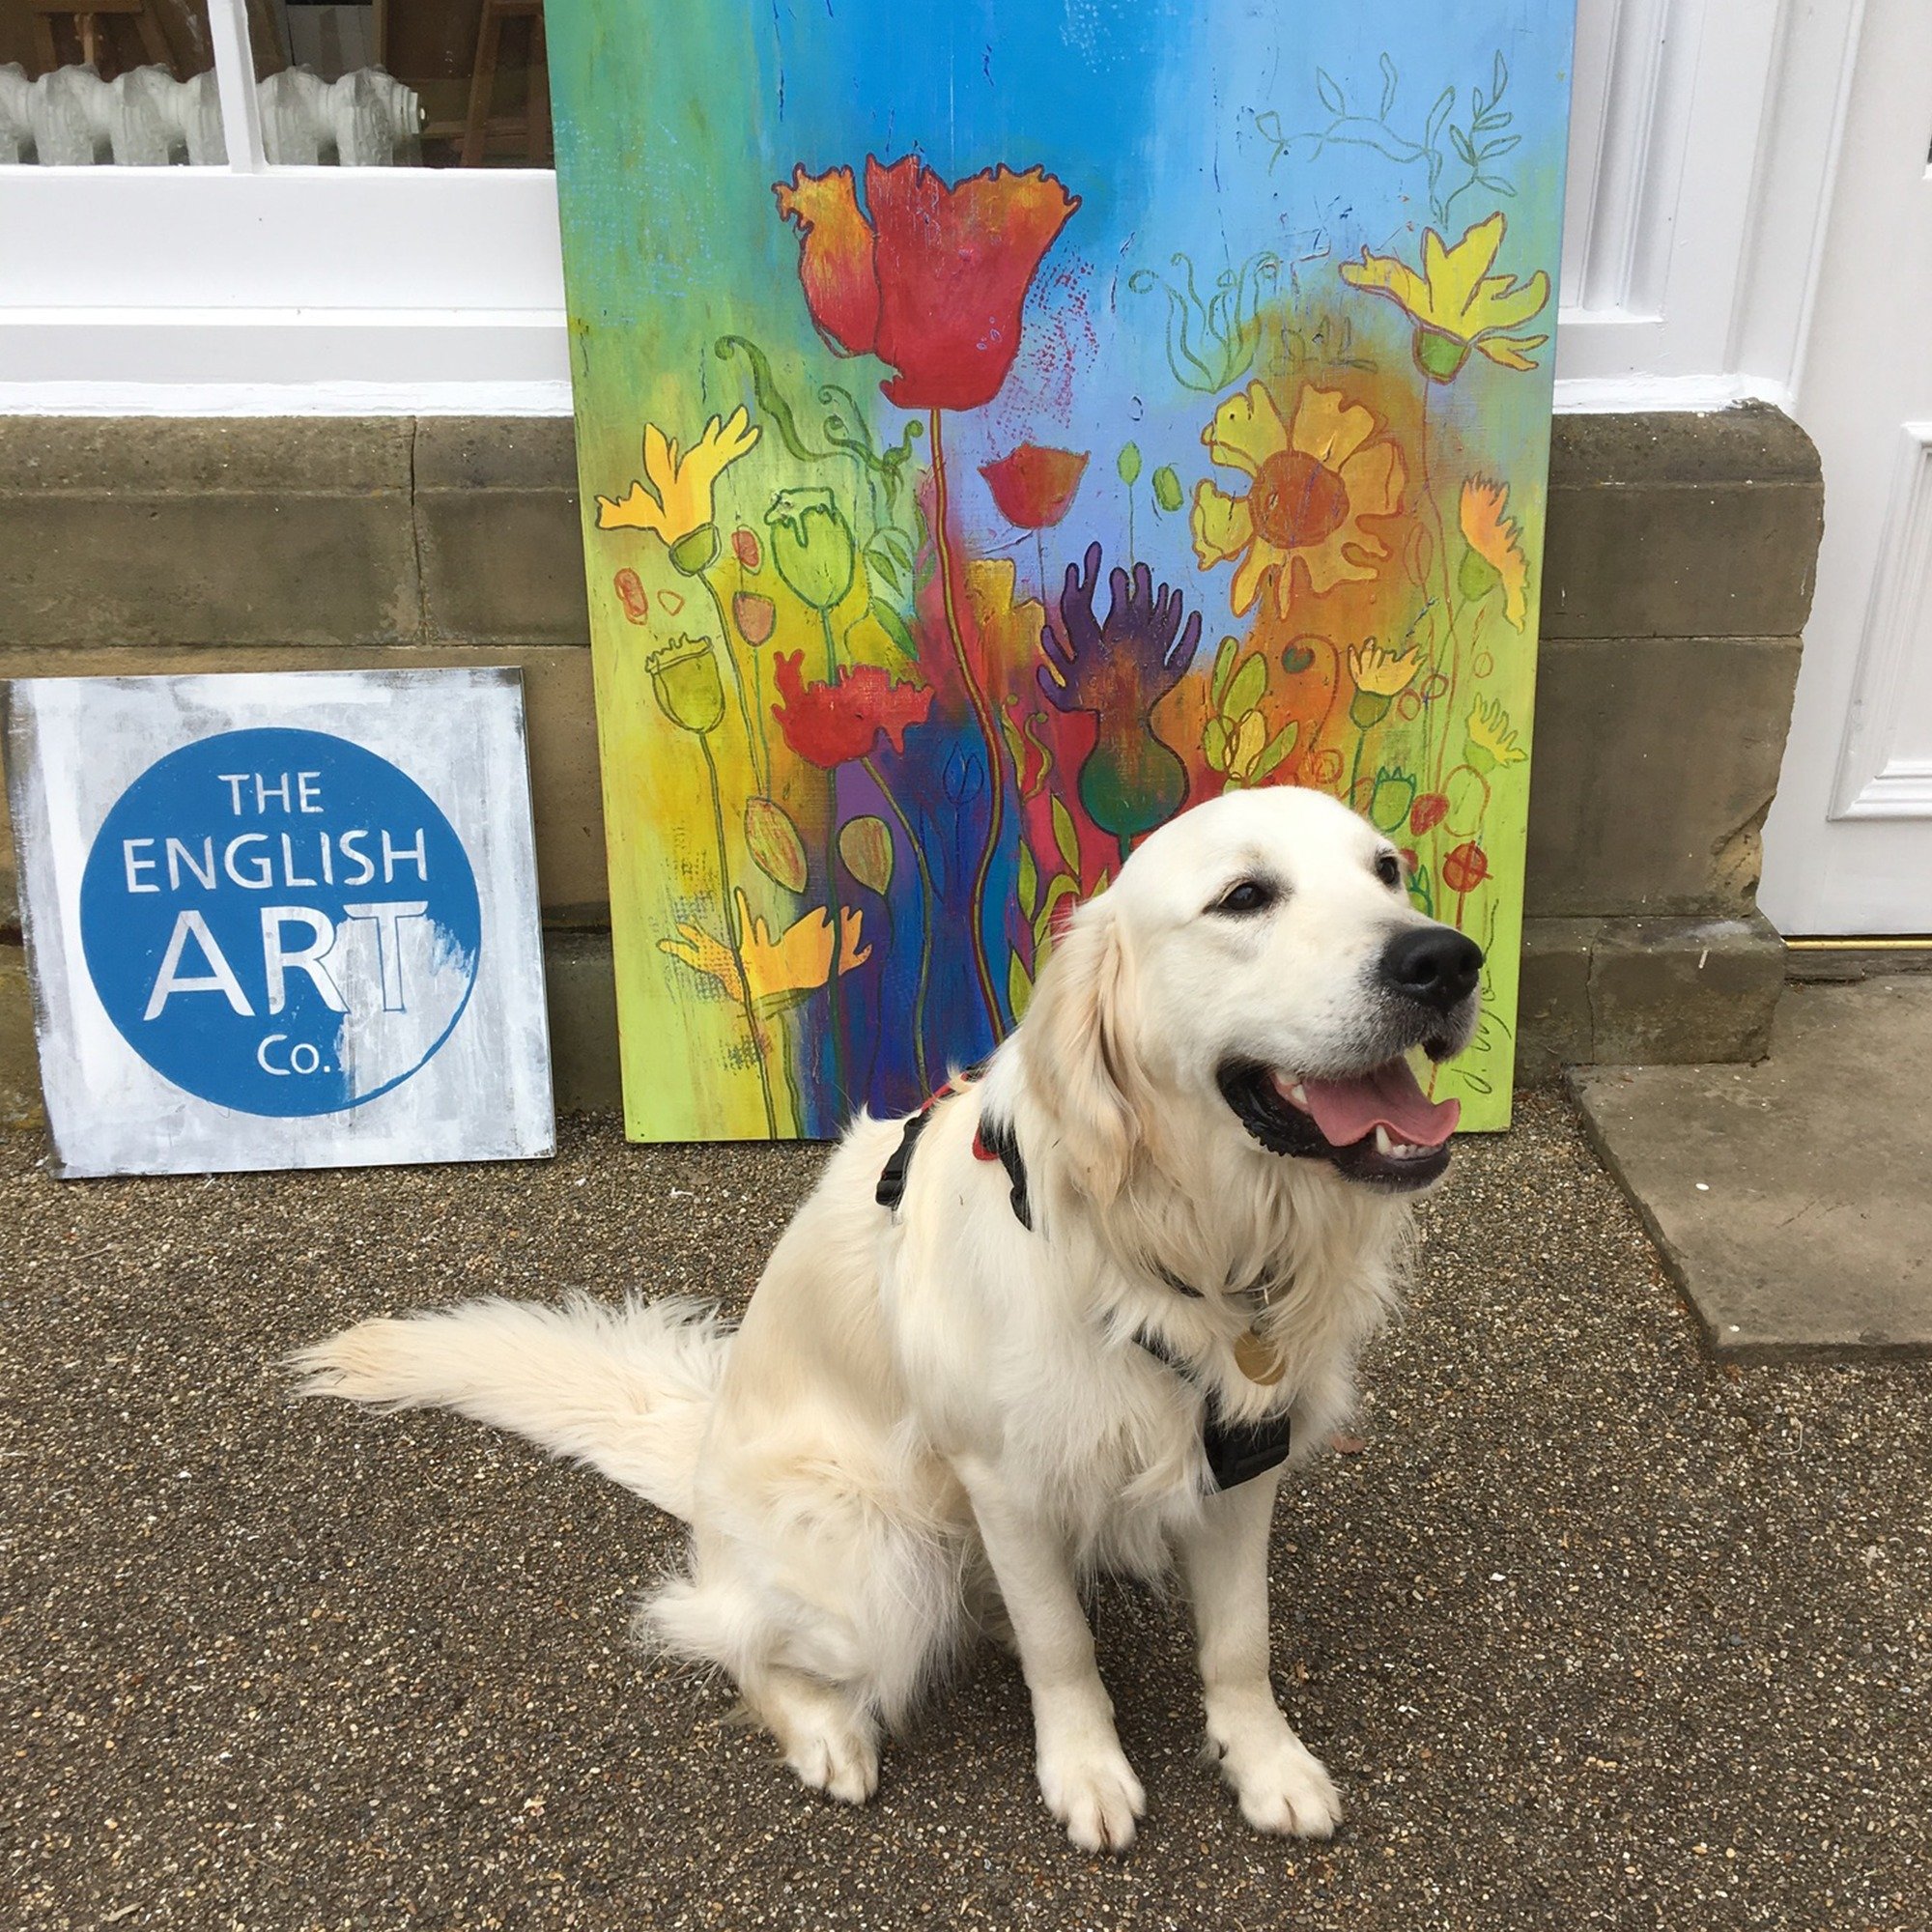 Because dogs can be art lovers too, right? 🐶

In case you didn't know, we LOVE being a dog friendly gallery. All we ask is that your furry friend doesn't sniff too close to the artworks. And that their paws have been cleaned from all that playing th